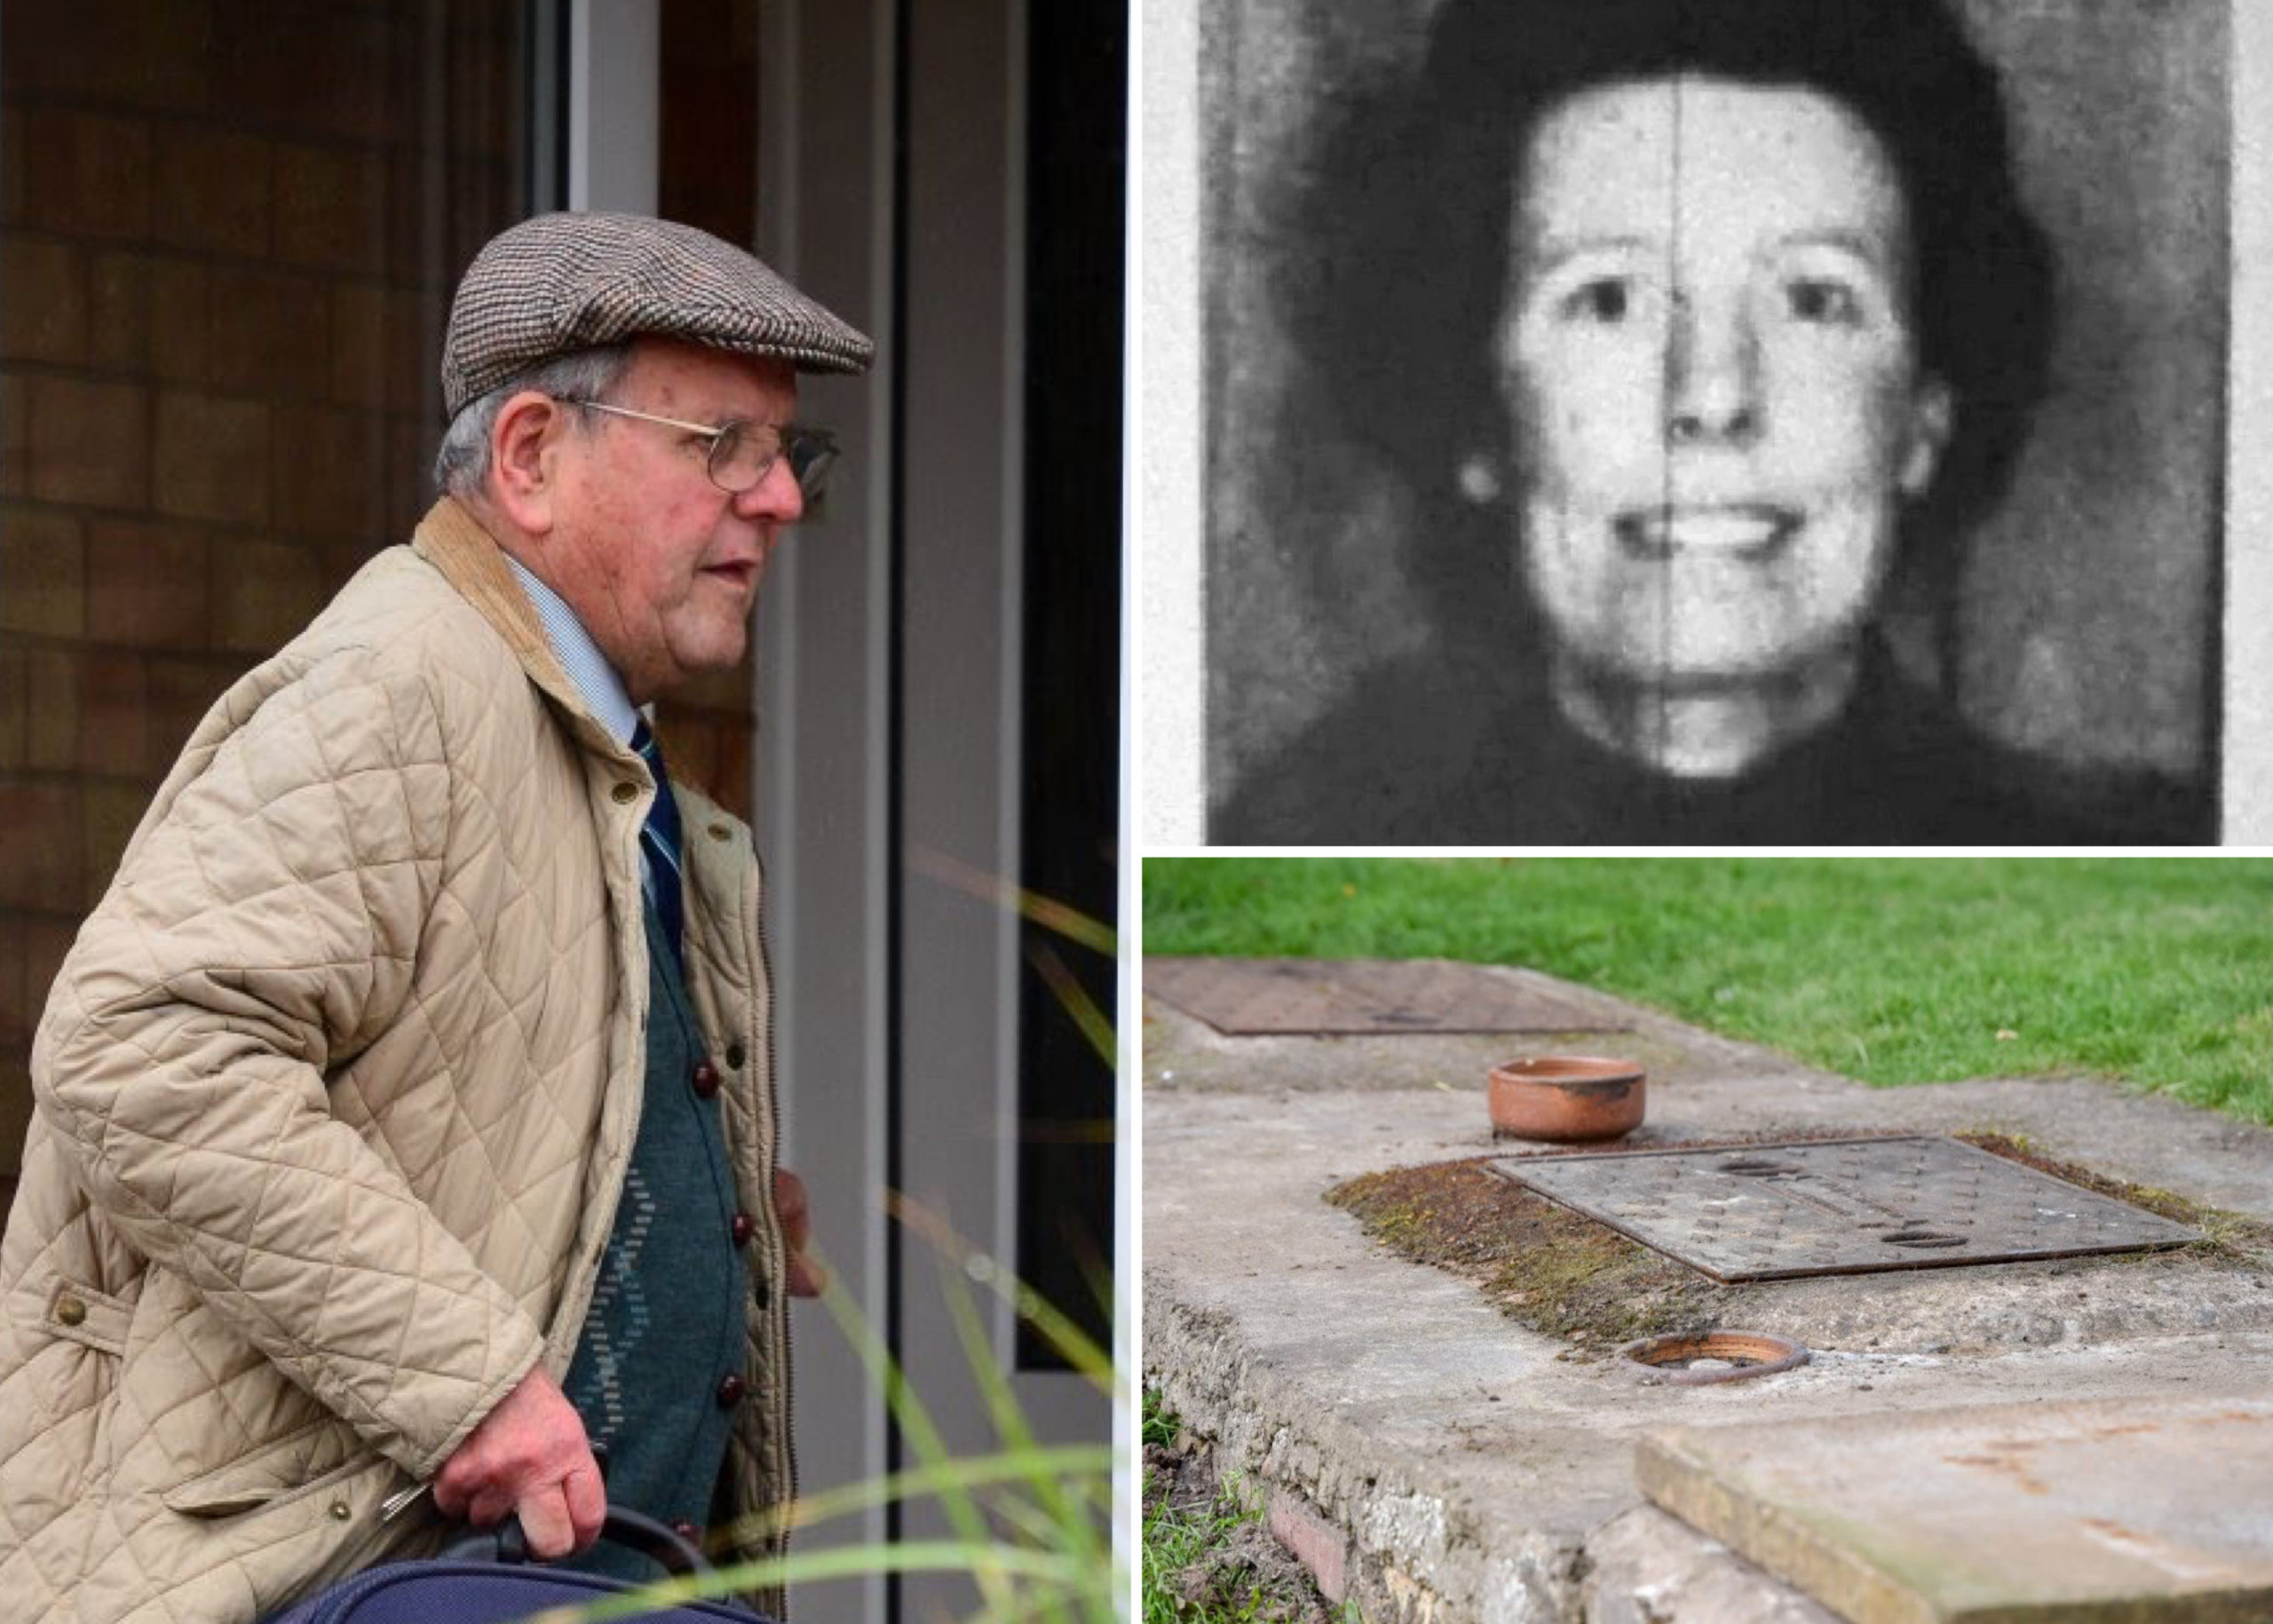 88-Year-Old Farmer Charged With Murdering Wife Who Was Found Buried In Septic Tank 37 Years After Reported Missing